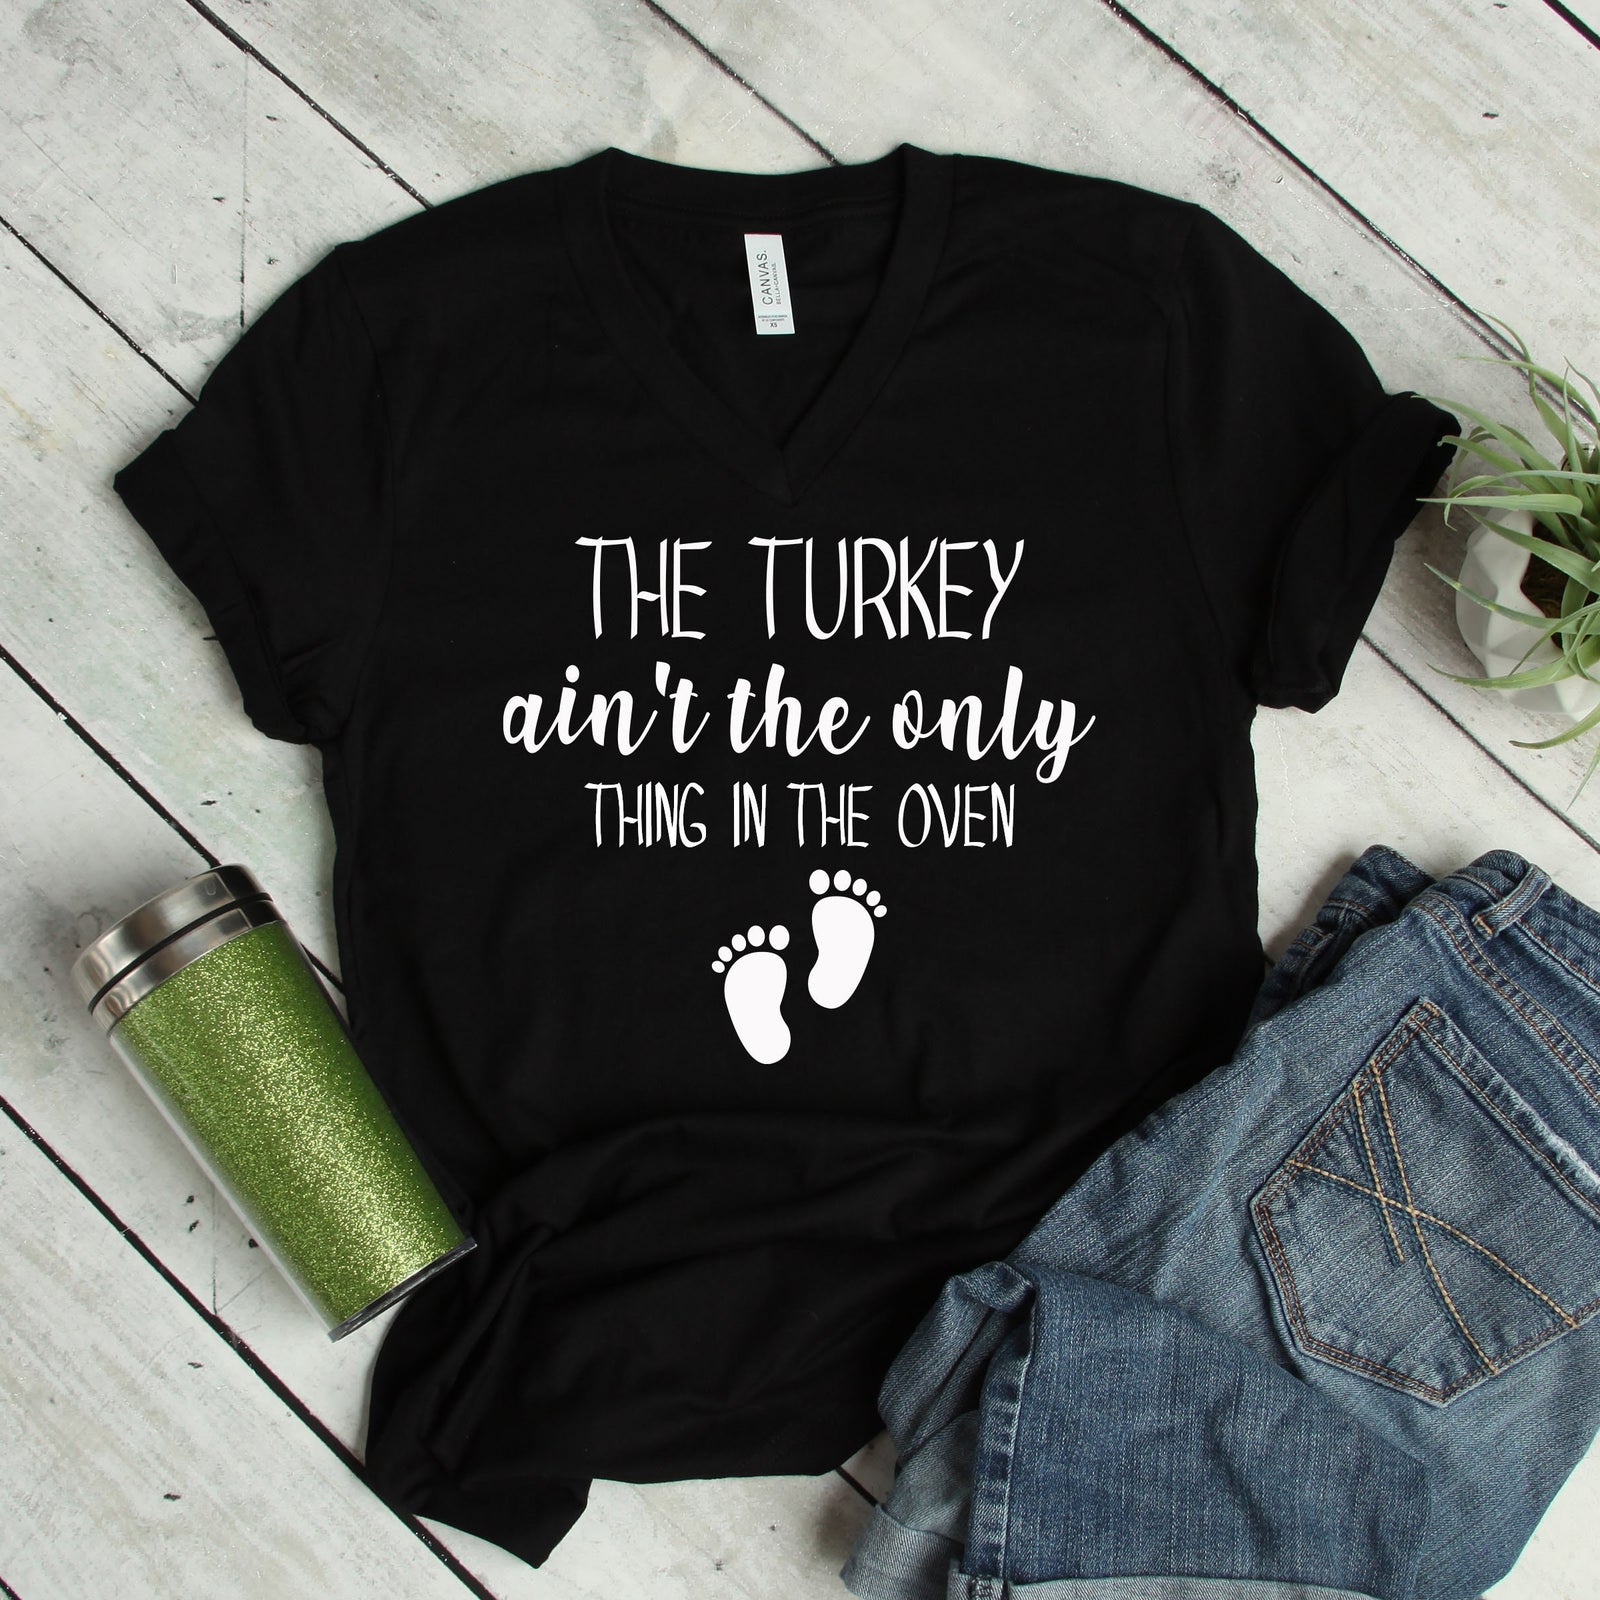 Turkey in the Oven - The Turkey Ain't the Only thing in the Oven - Pregnancy Announcement T Shirt - Funny Baby Tees